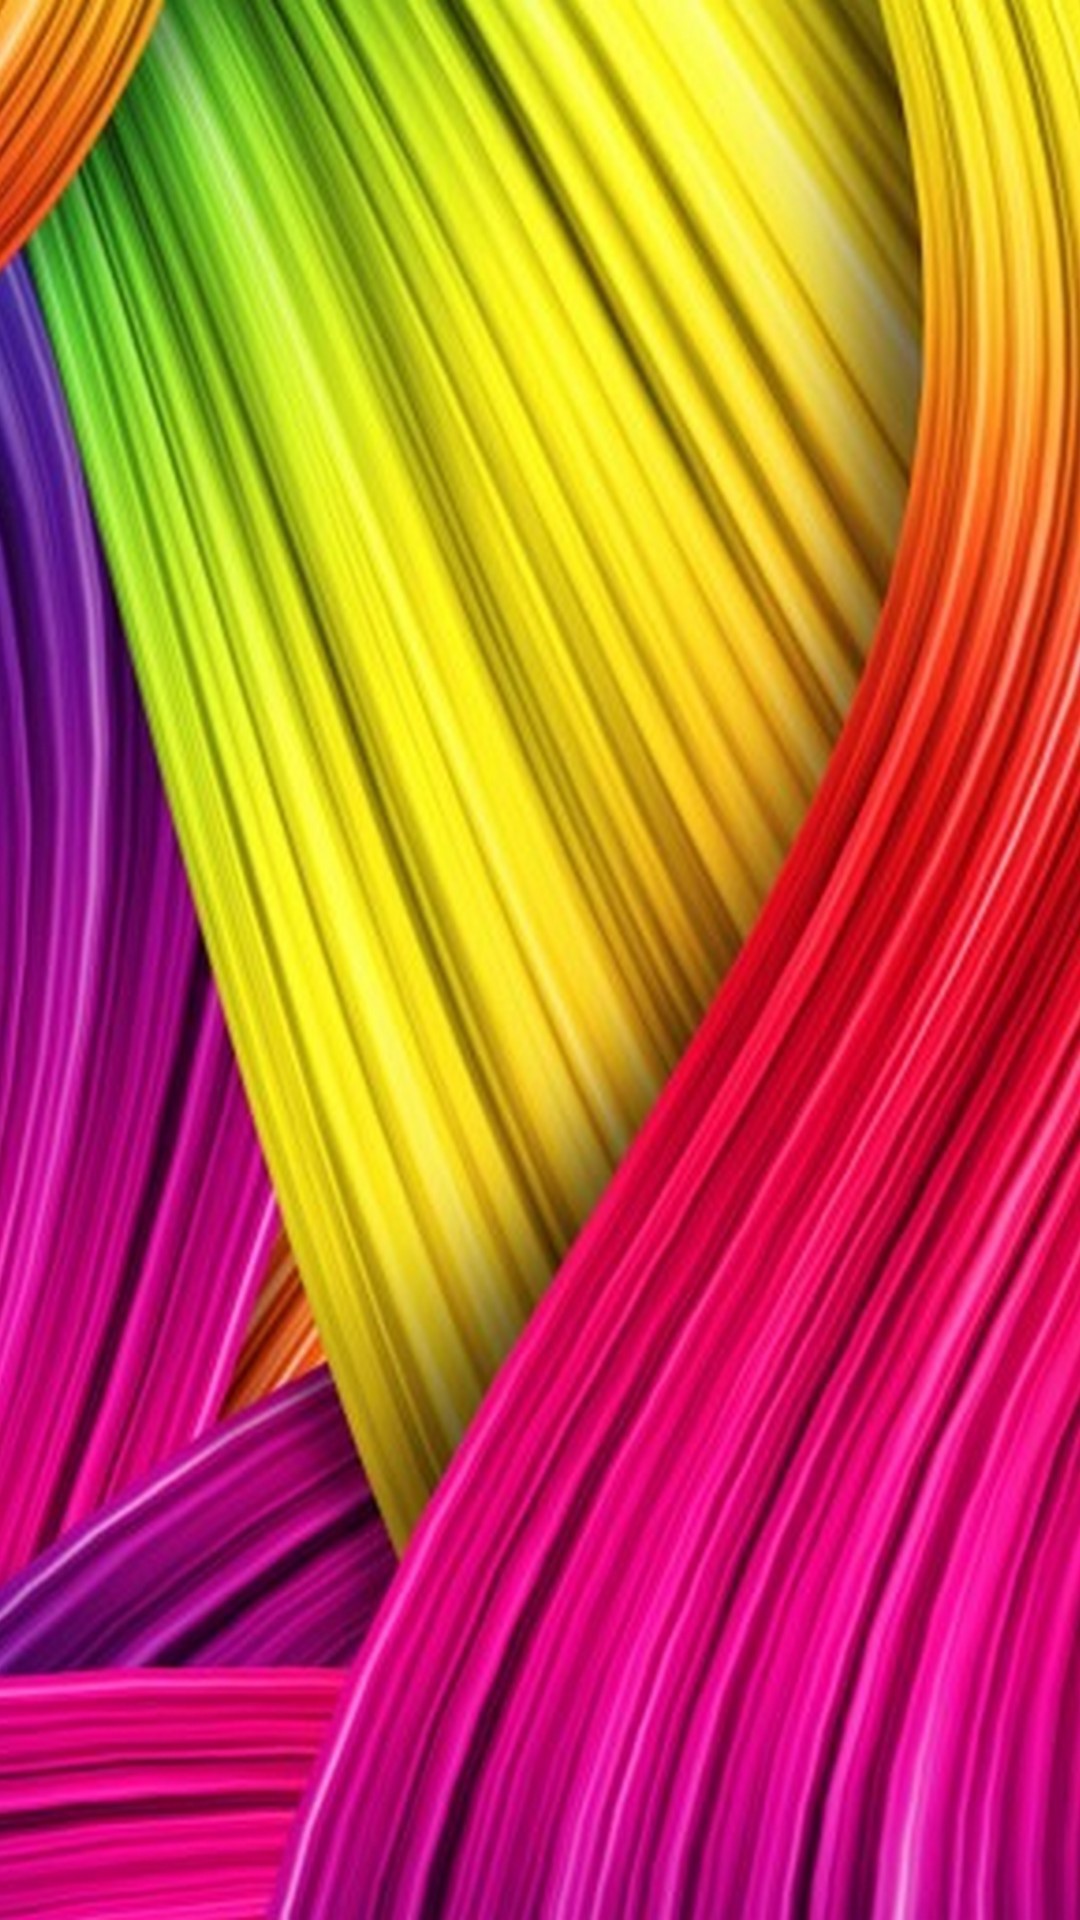 Phones Wallpaper Rainbow Colors with high-resolution 1080x1920 pixel. Download all Mobile Wallpapers and Use them as wallpapers for your iPhone, Tablet, iPad, Android and other mobile devices